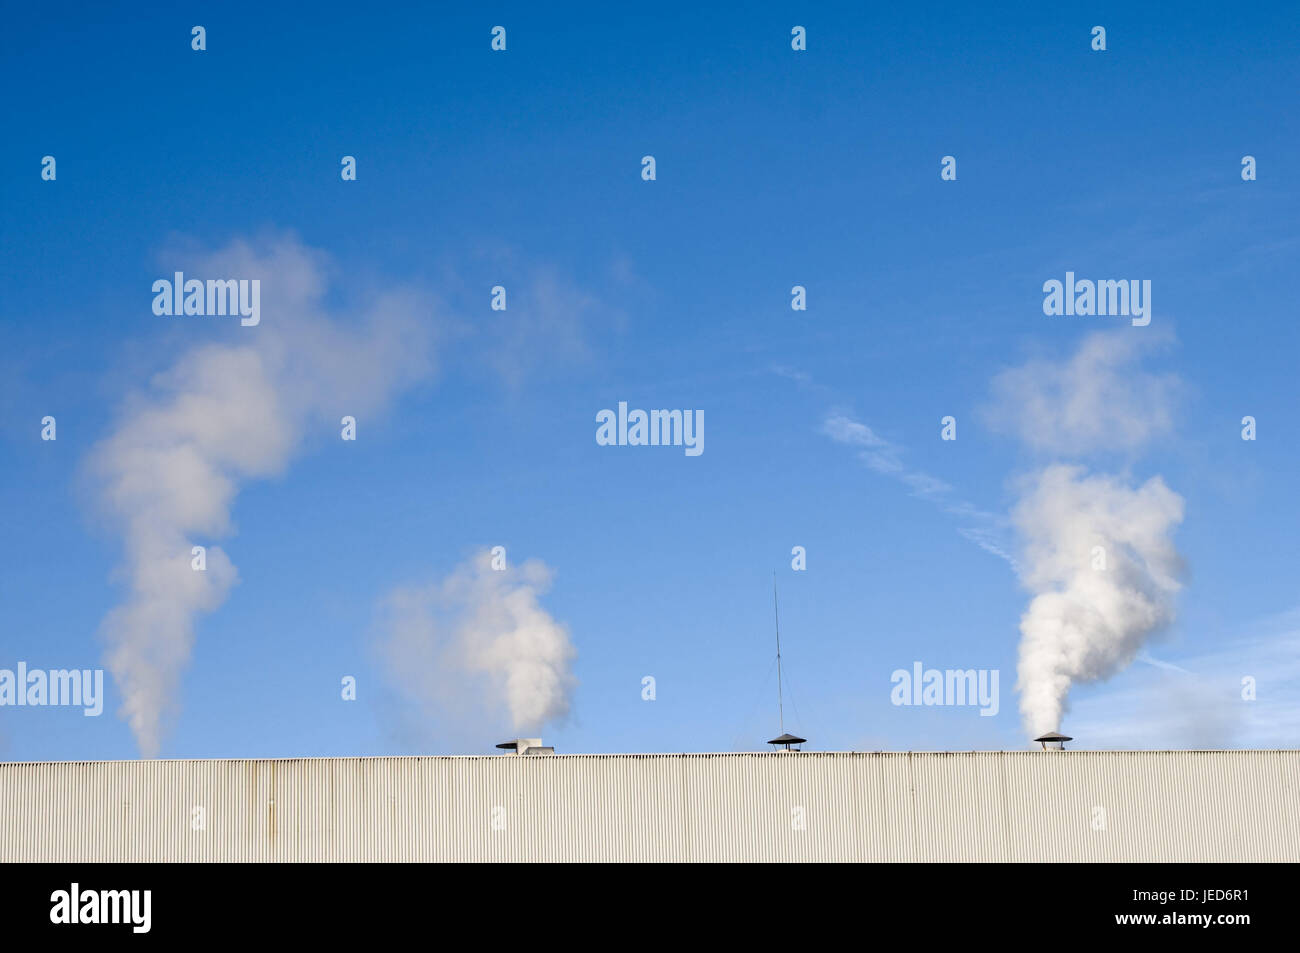 Factory, smoke, detail, conception, factory smoke, conception, factory chimneys, environmental pollution, fouling, sky, blue, industry, nature, Stock Photo